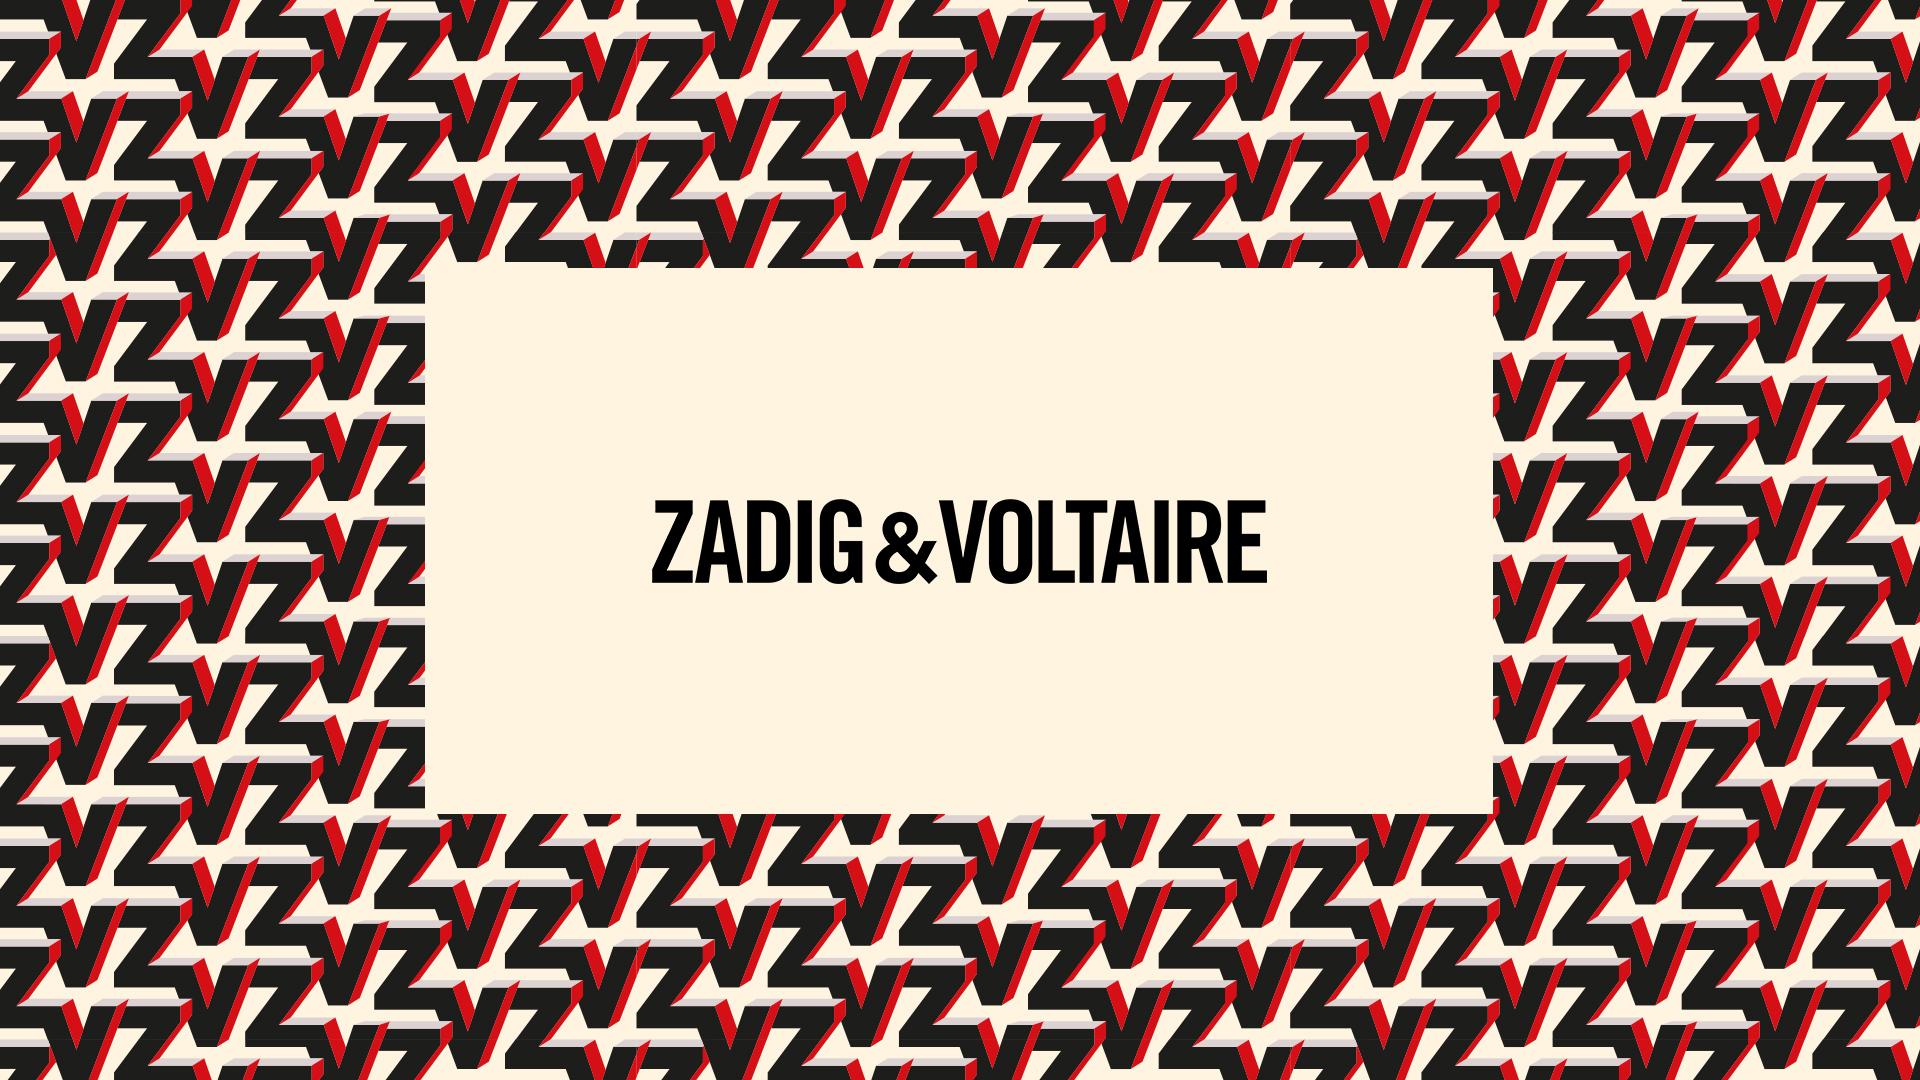 voltaire and zadig